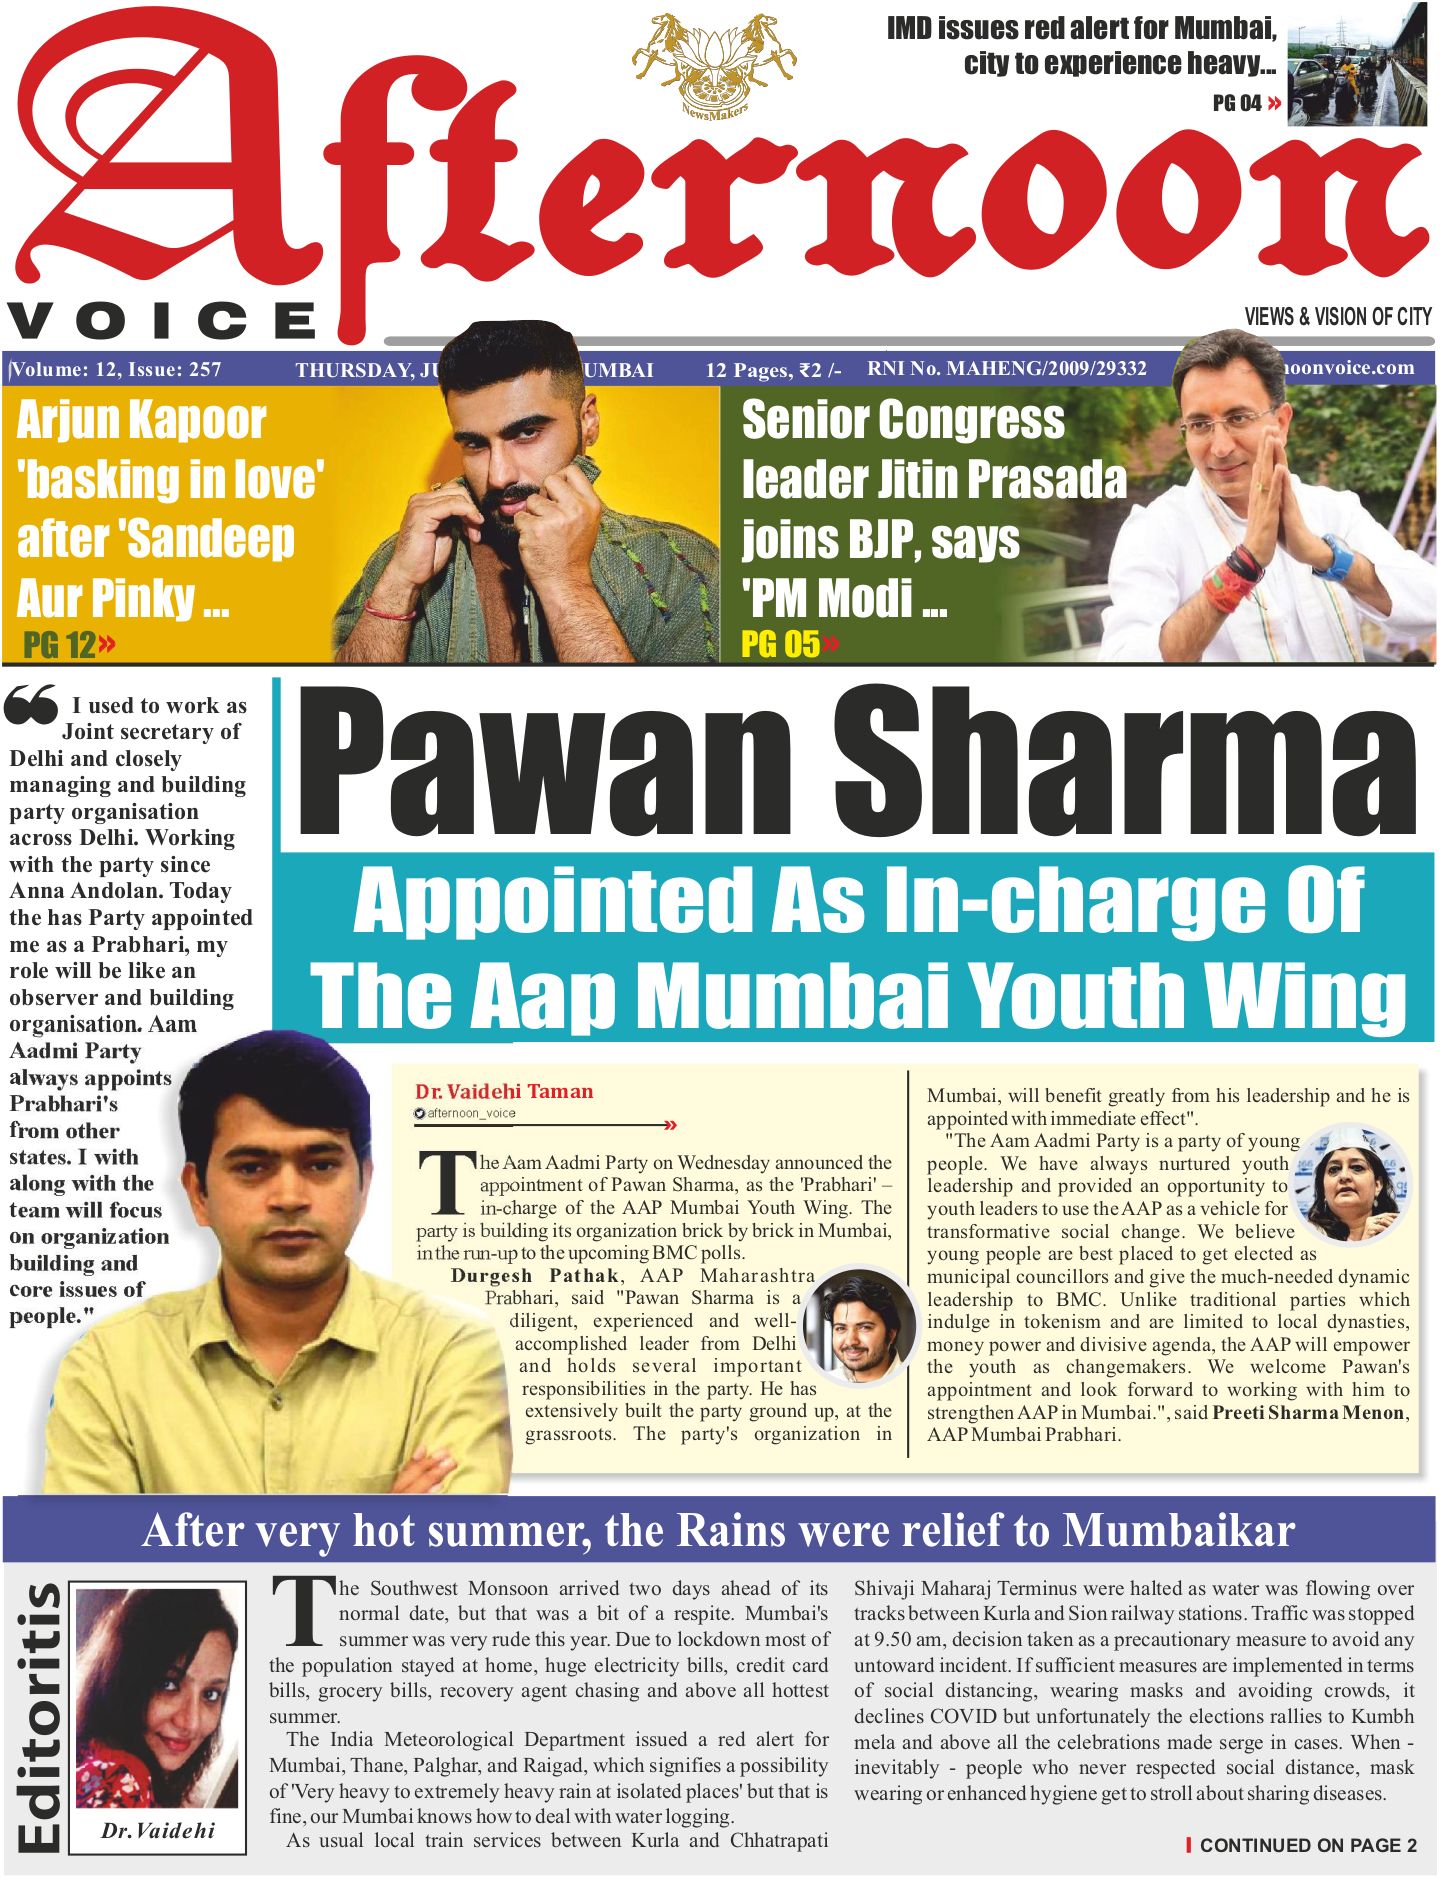 10 June 21 Page 1 Online English News Paper Daily News Epaper Today Newspaper